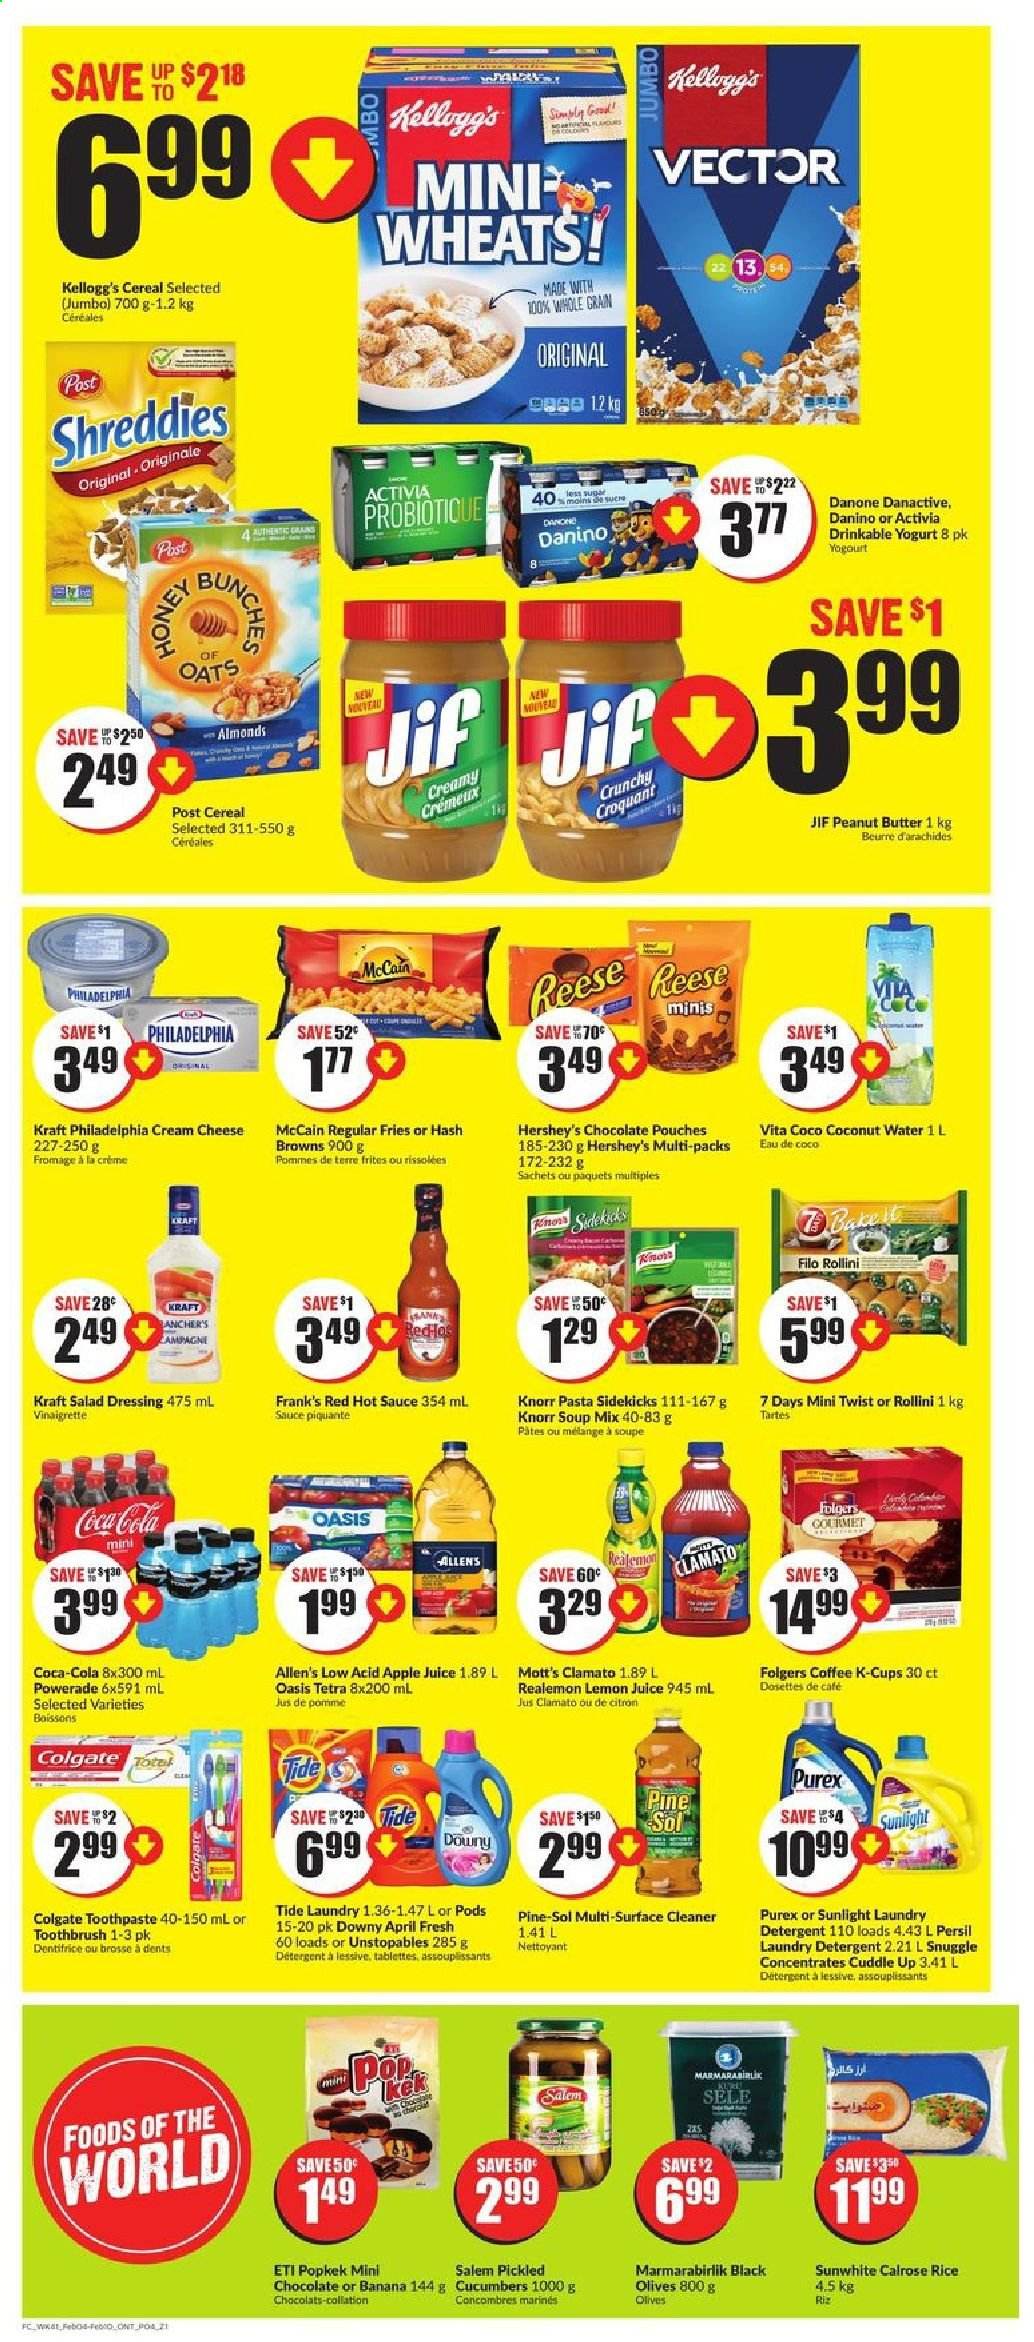 thumbnail - FreshCo. Flyer - February 04, 2021 - February 10, 2021 - Sales products - cucumber, Mott's, soup mix, soup, pasta, sauce, Kraft®, cream cheese, yoghurt, Activia, filo dough, Hershey's, McCain, hash browns, potato fries, chocolate, Kellogg's, 7 Days, cereals, rice, salad dressing, vinaigrette dressing, hot sauce, dressing, peanut butter, Jif, almonds, apple juice, Coca-Cola, Powerade, Clamato, coconut water, lemon juice, coffee, Folgers, coffee capsules, L'Or, K-Cups, Knorr, Danone, olives. Page 4.